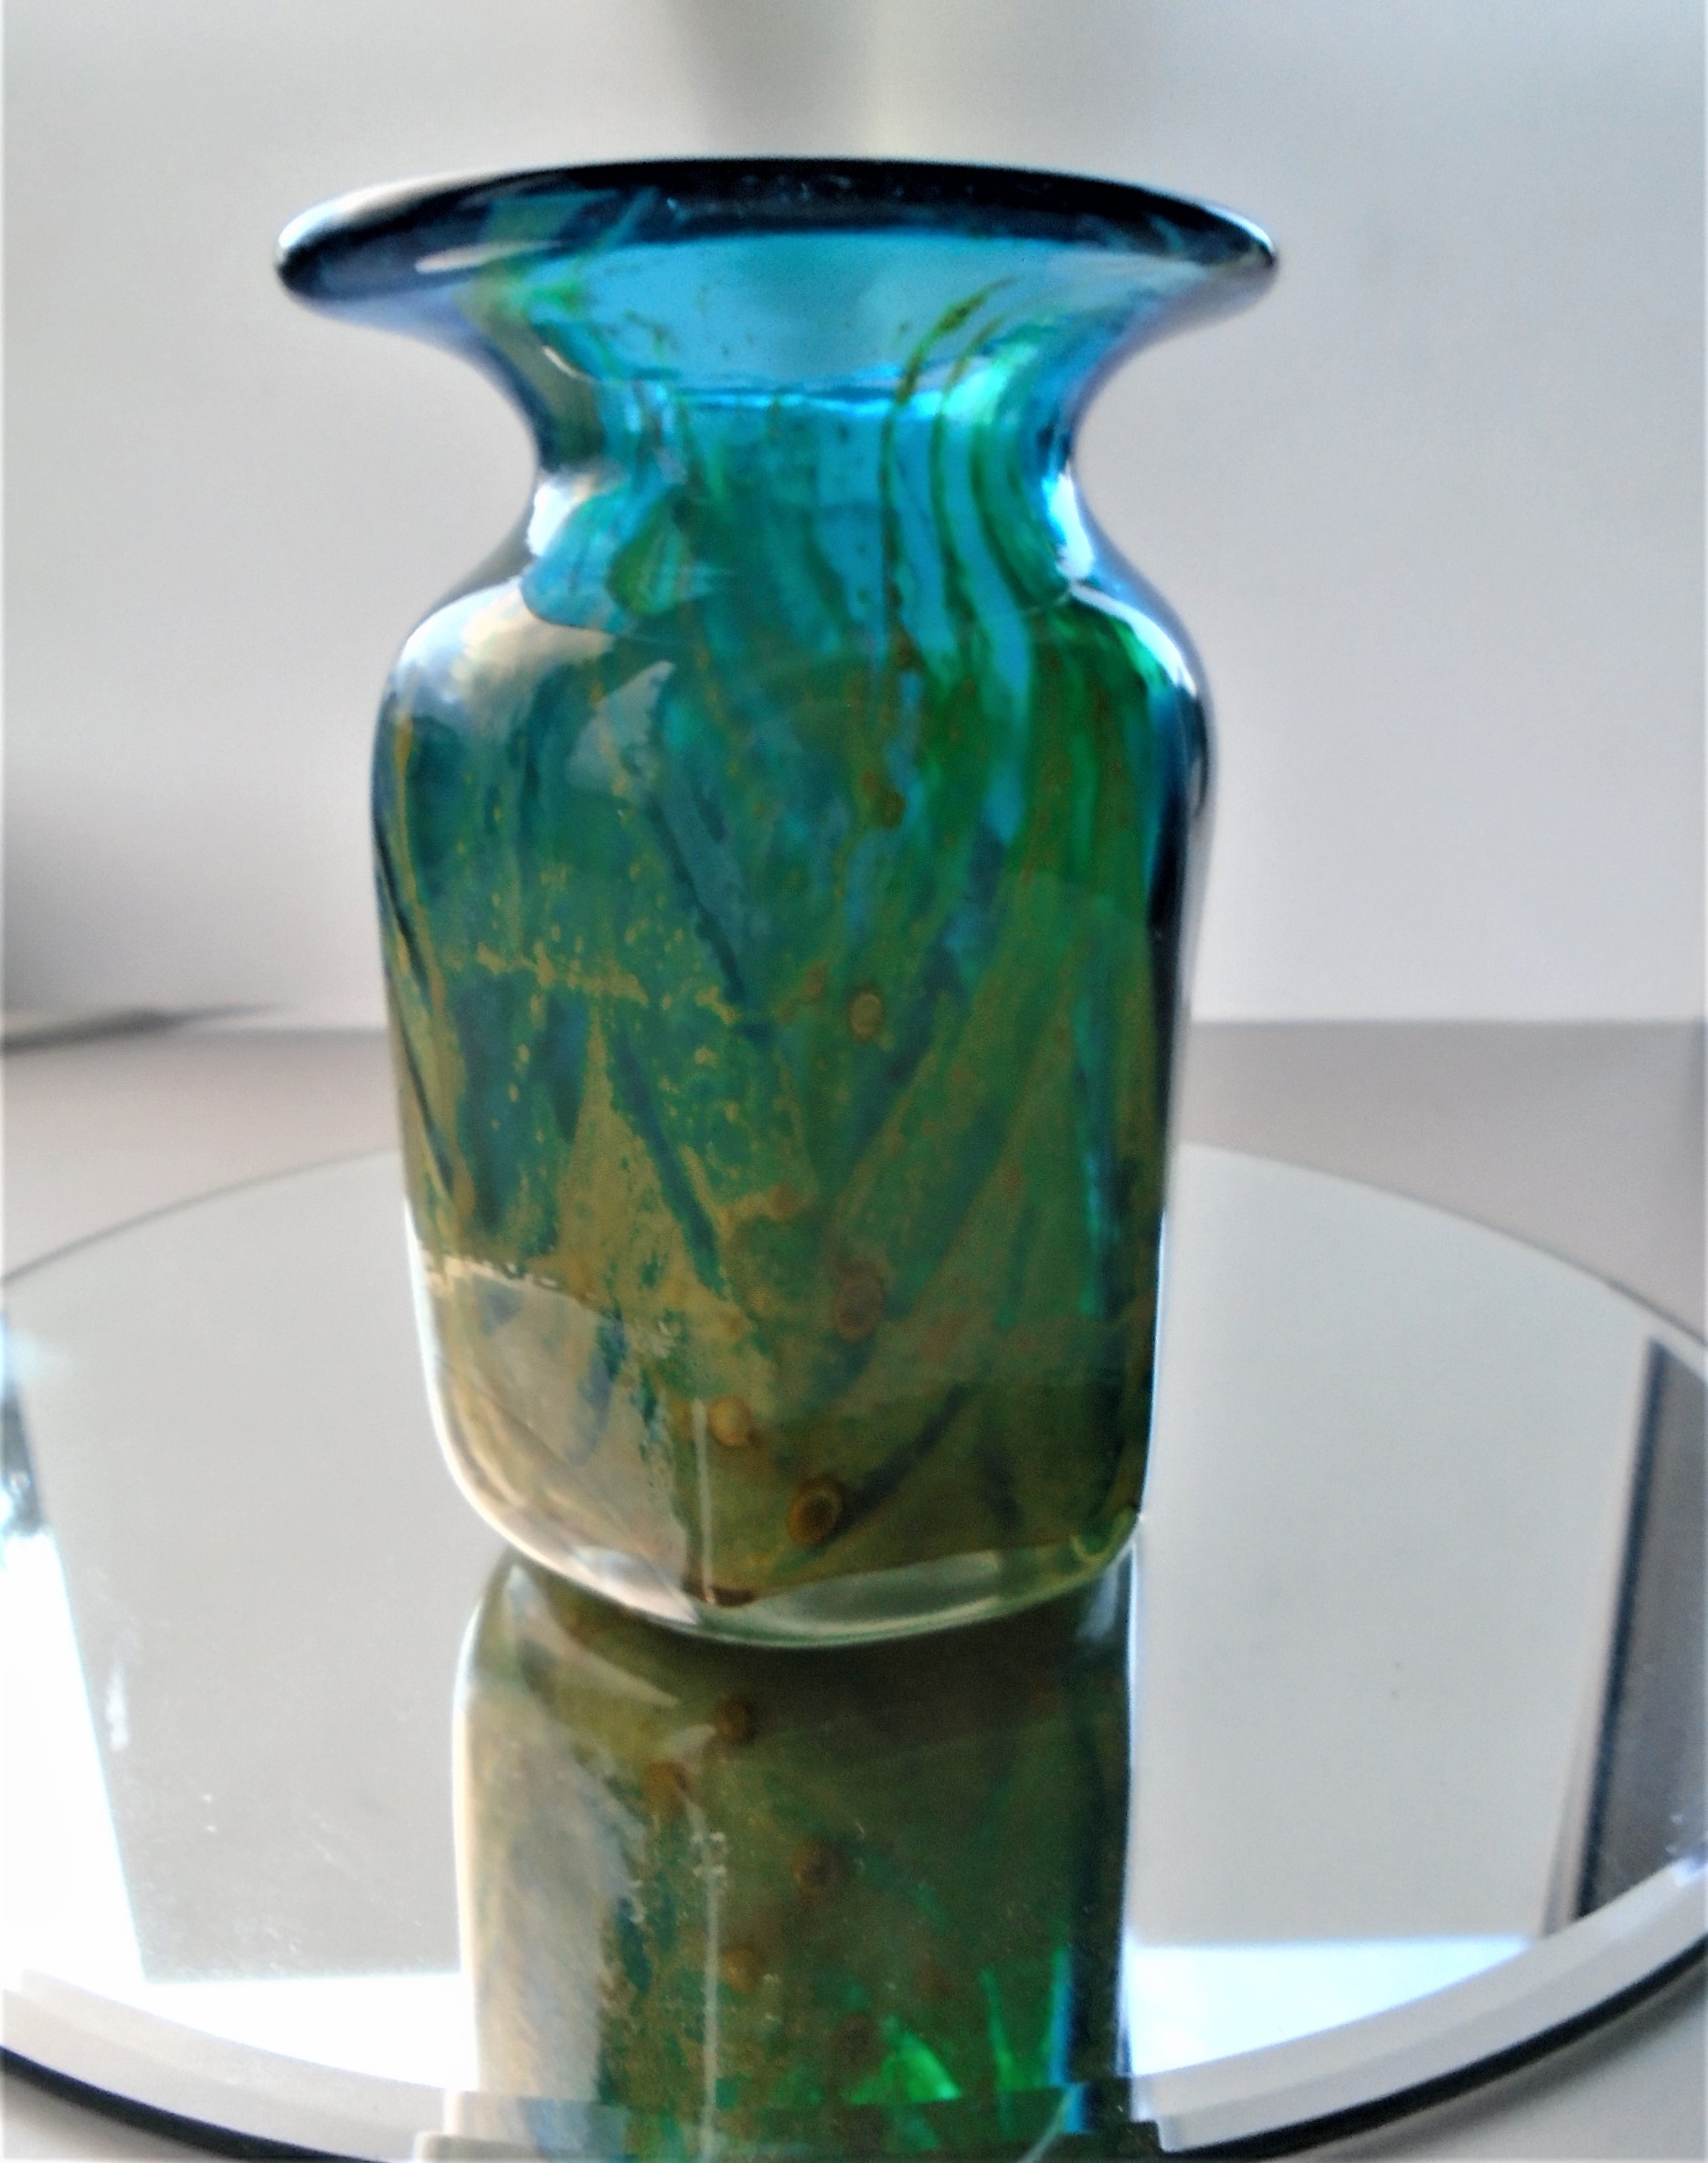 Fine example of an early VINTAGE MDINA SIX SIDED VASE IN THE SEA AND SAND PATTERN